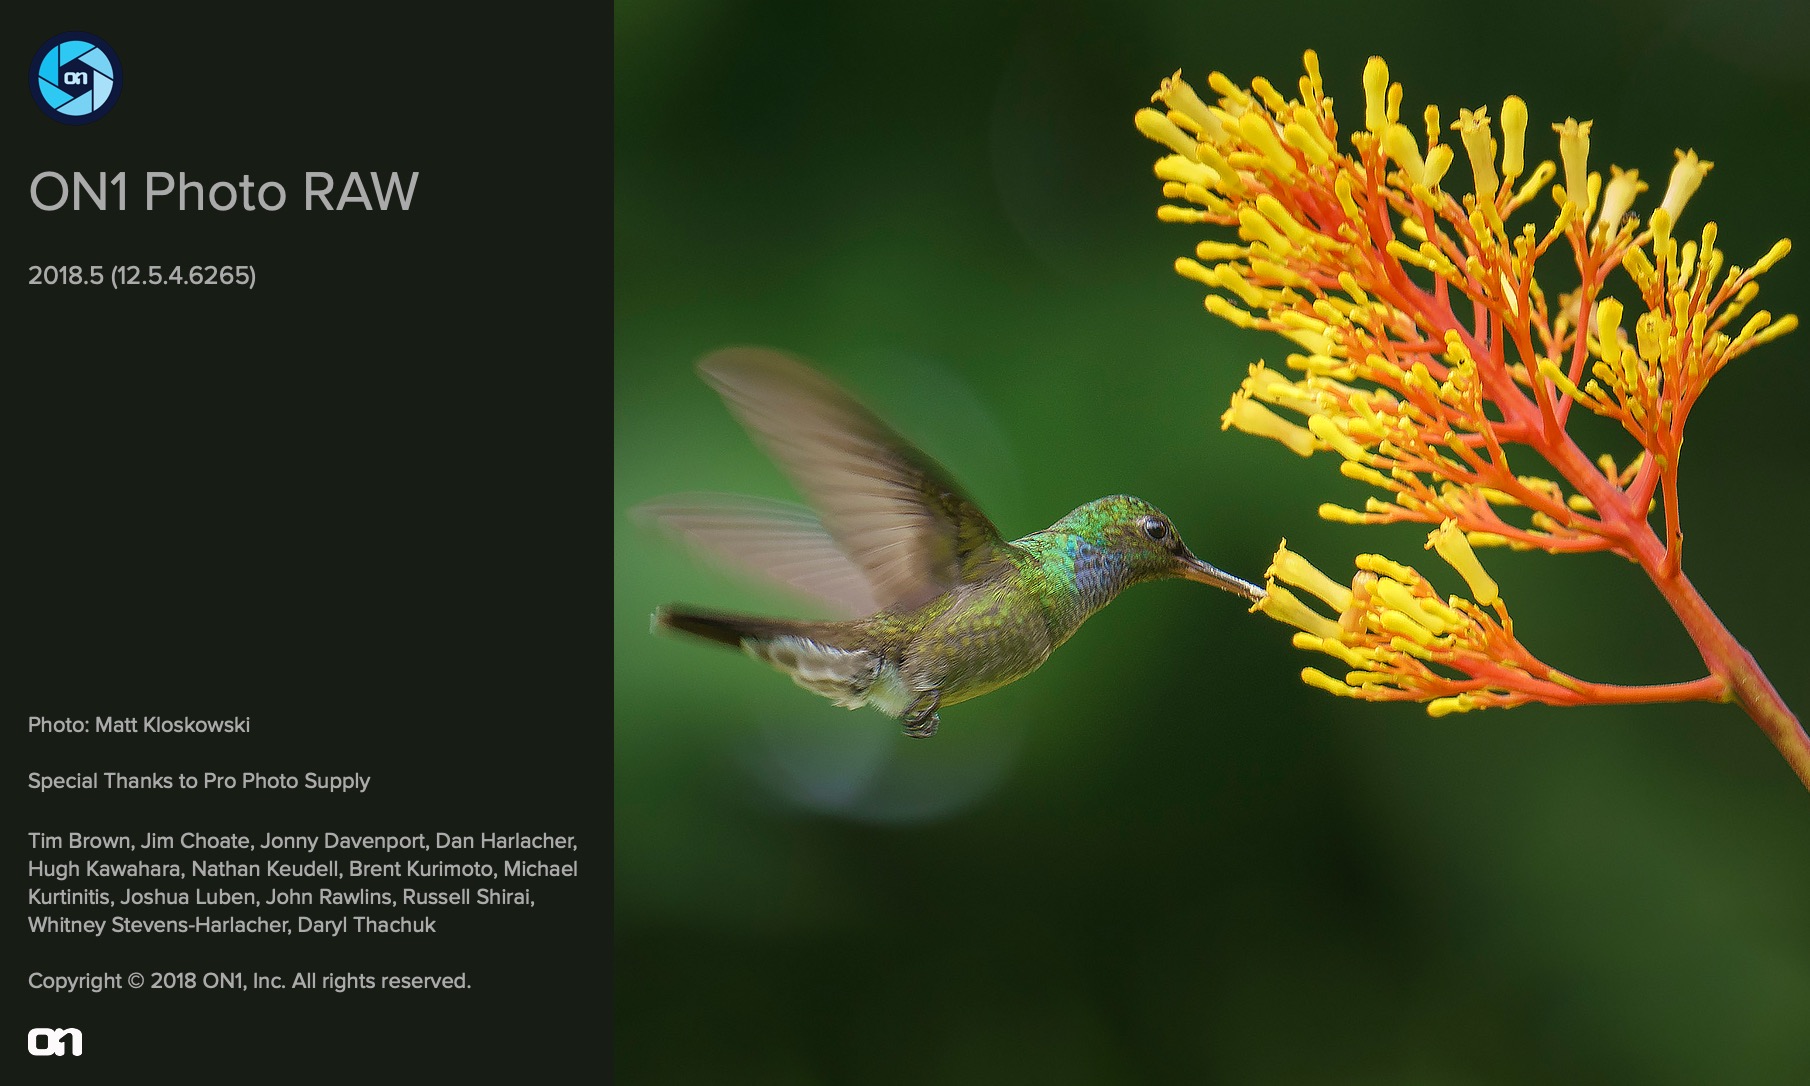 On1 photo raw 2018.5 v 12.5.2.5757 download free download